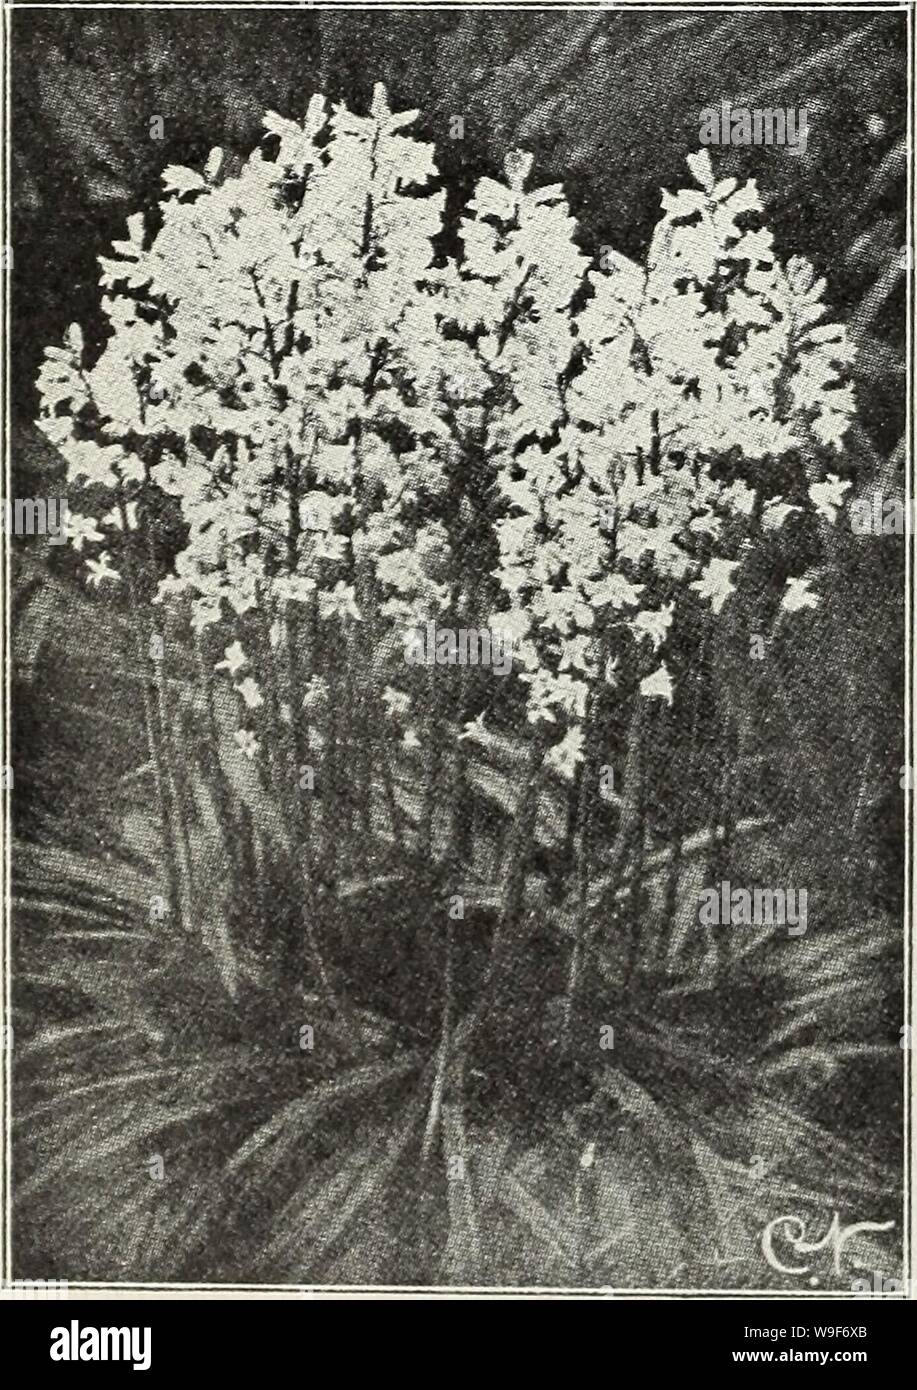 Archive image from page 19 of Currie's autumn 1929 54th year. Currie's autumn 1929 54th year bulbs and plants  curriesautumn19219curr Year: 1929 ( Grape Hyacinths GRAPE HYACINTHS (Hyacinthus muscari) Forms small spikes of flowers resembling a bunch of grapes. Perfectly hardy. Botryoldes Blue—Doz., 50c; 100, 3.00. Botryoides White—Doz., 80c; 100, 6,00. Heavenly Blue—The best and largest of the Grape Hyacinths. Good for pot culture as well as out'doors. Doz., 60c; 100, 4.00. ORNITHOGALUM (Star of Bethlehem) Umbellatum—Pretty white star shaped flowers, inside striped green, borne in umbels about Stock Photo